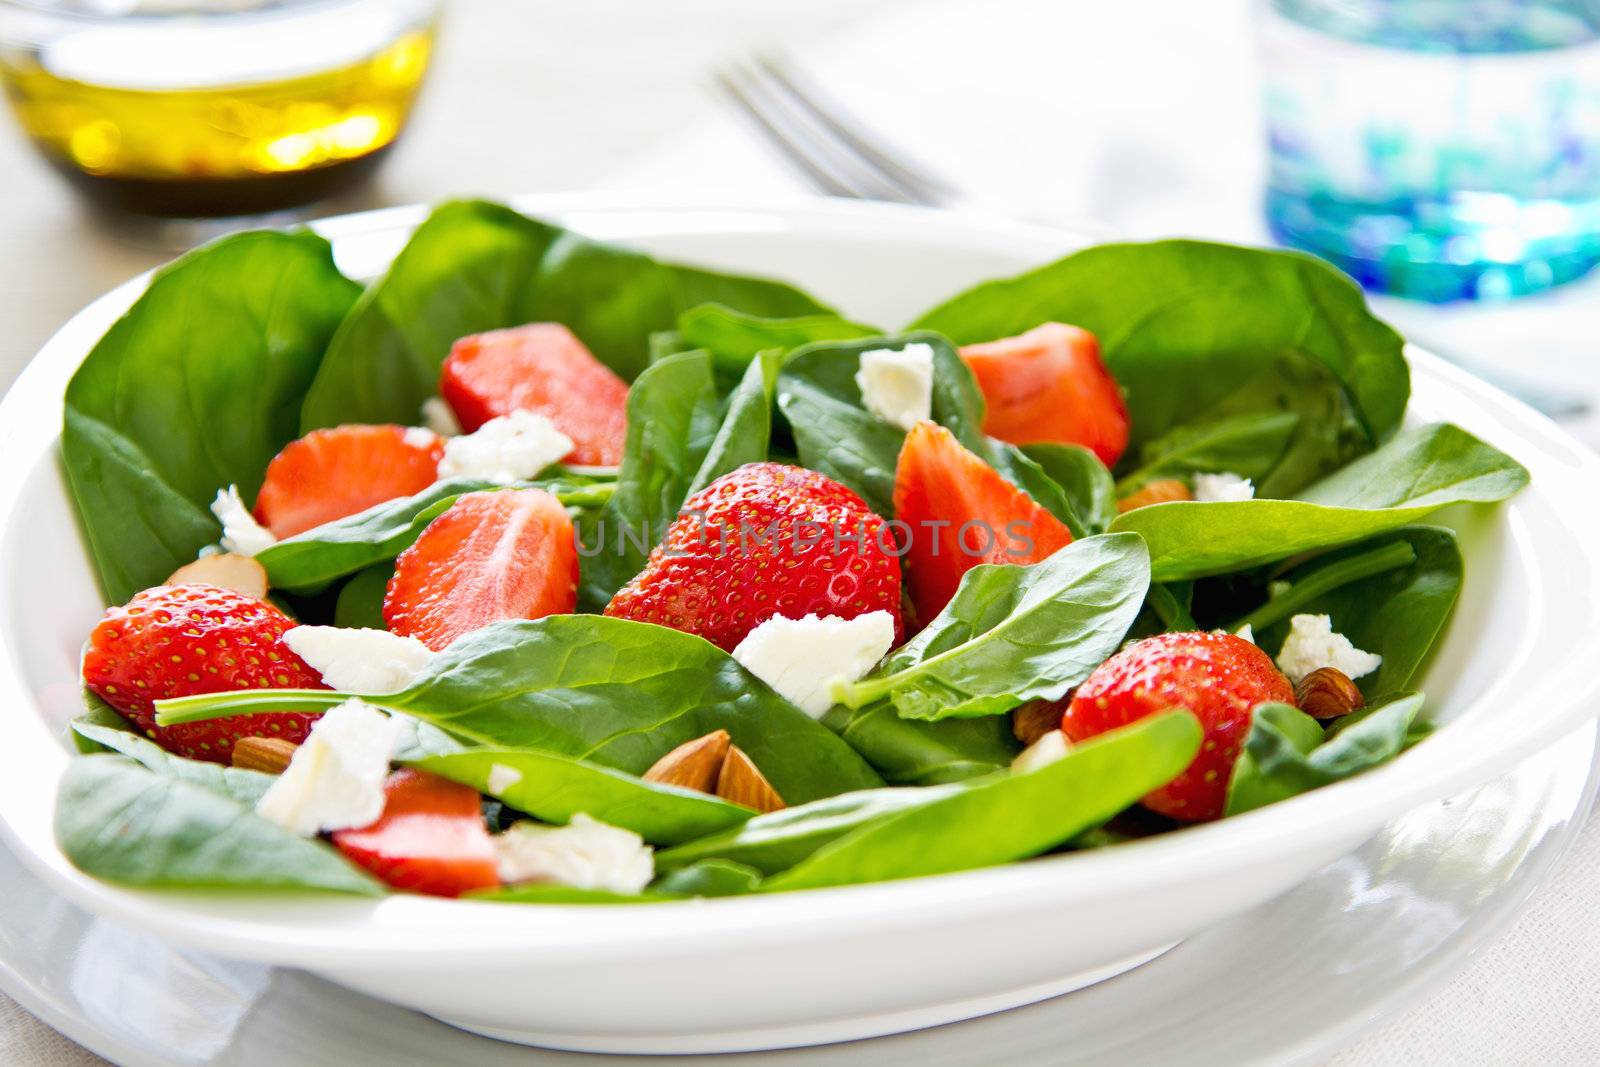 Strawberry with Spinach,Feta cheese and Almond salad